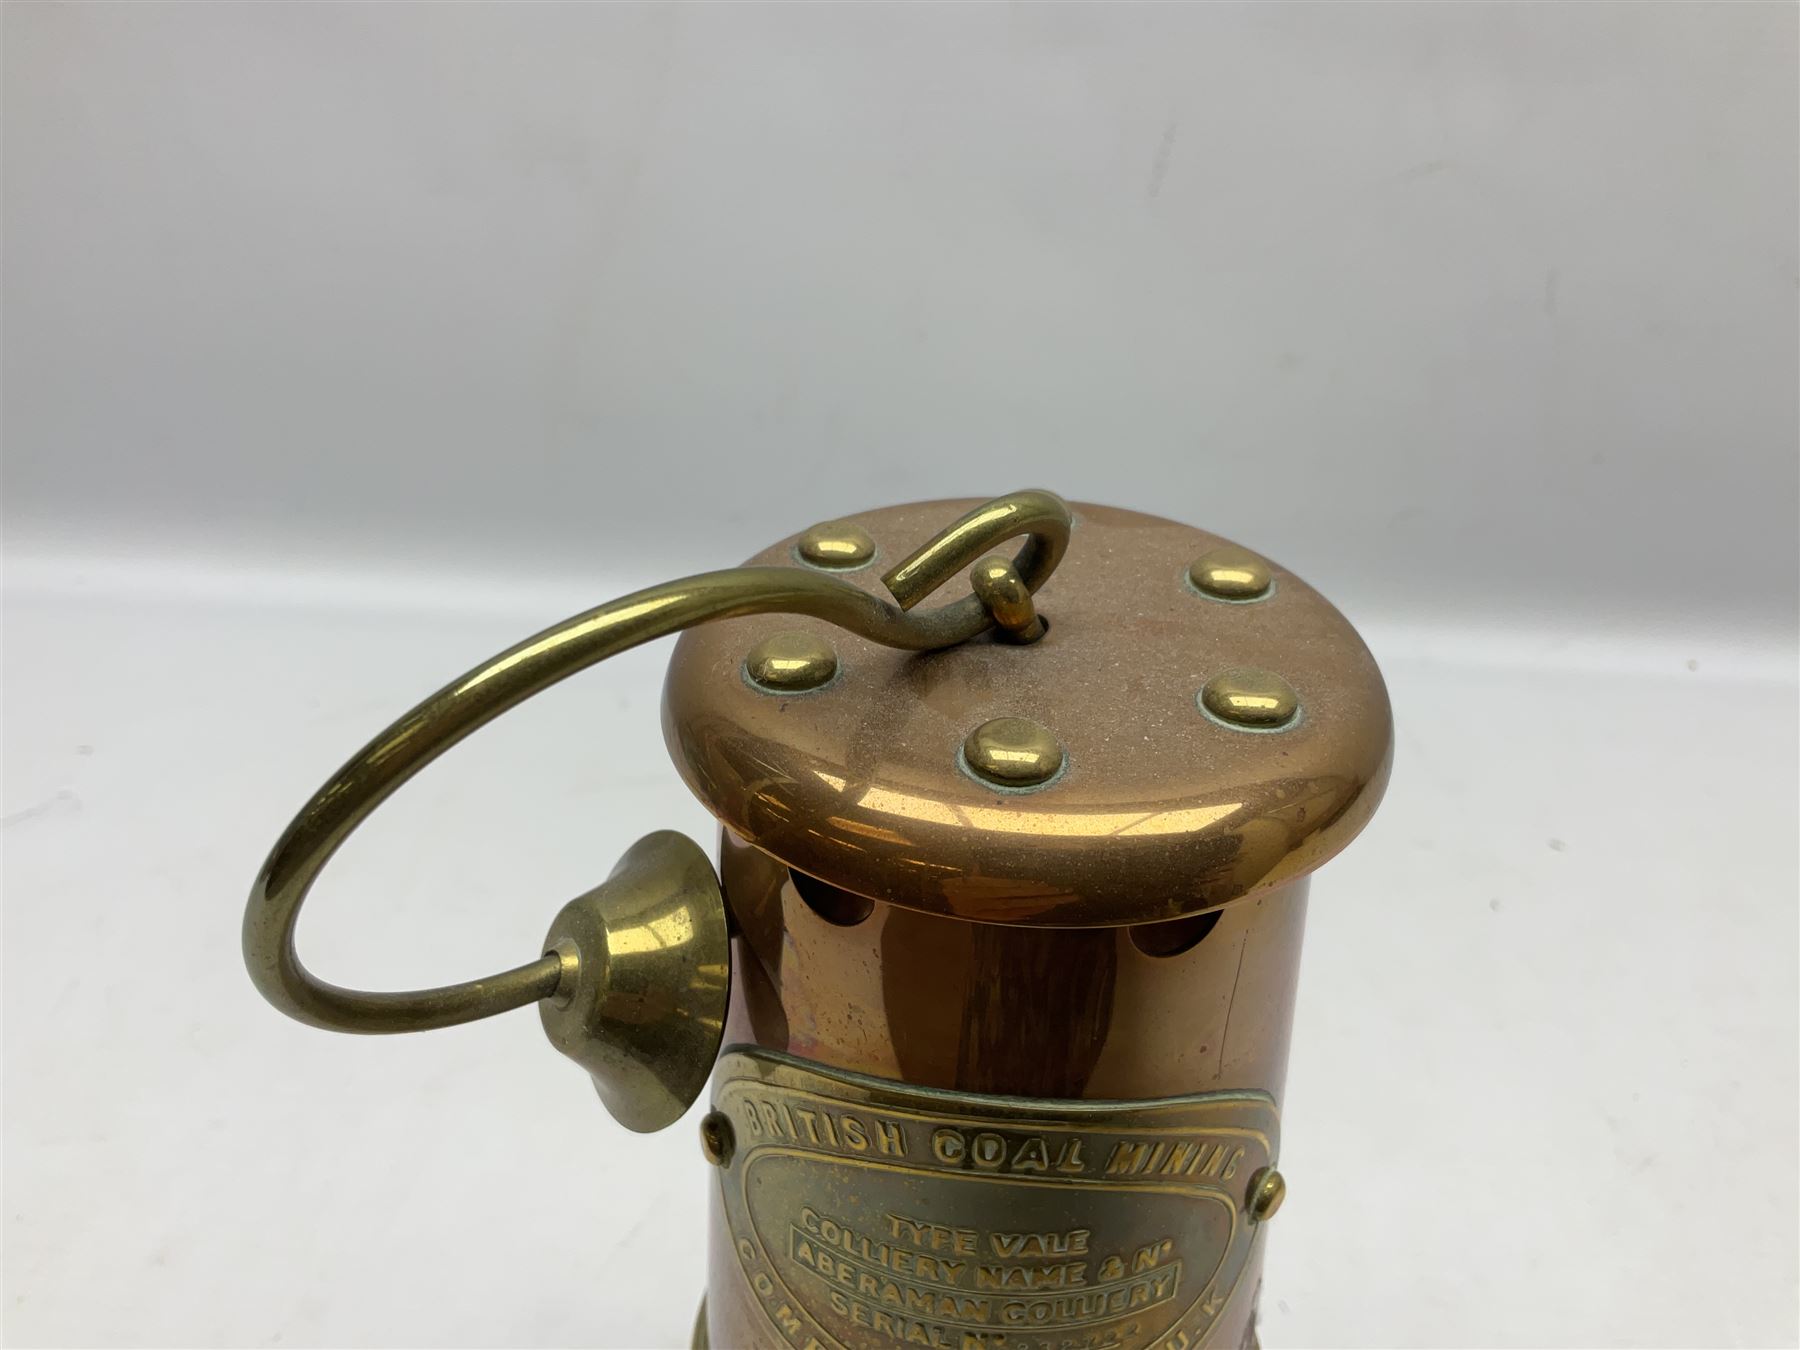 Copper and brass miners lamp by British Coal Company Wales UK for Aberaman Colliery Serial No. 23272 - Image 2 of 6